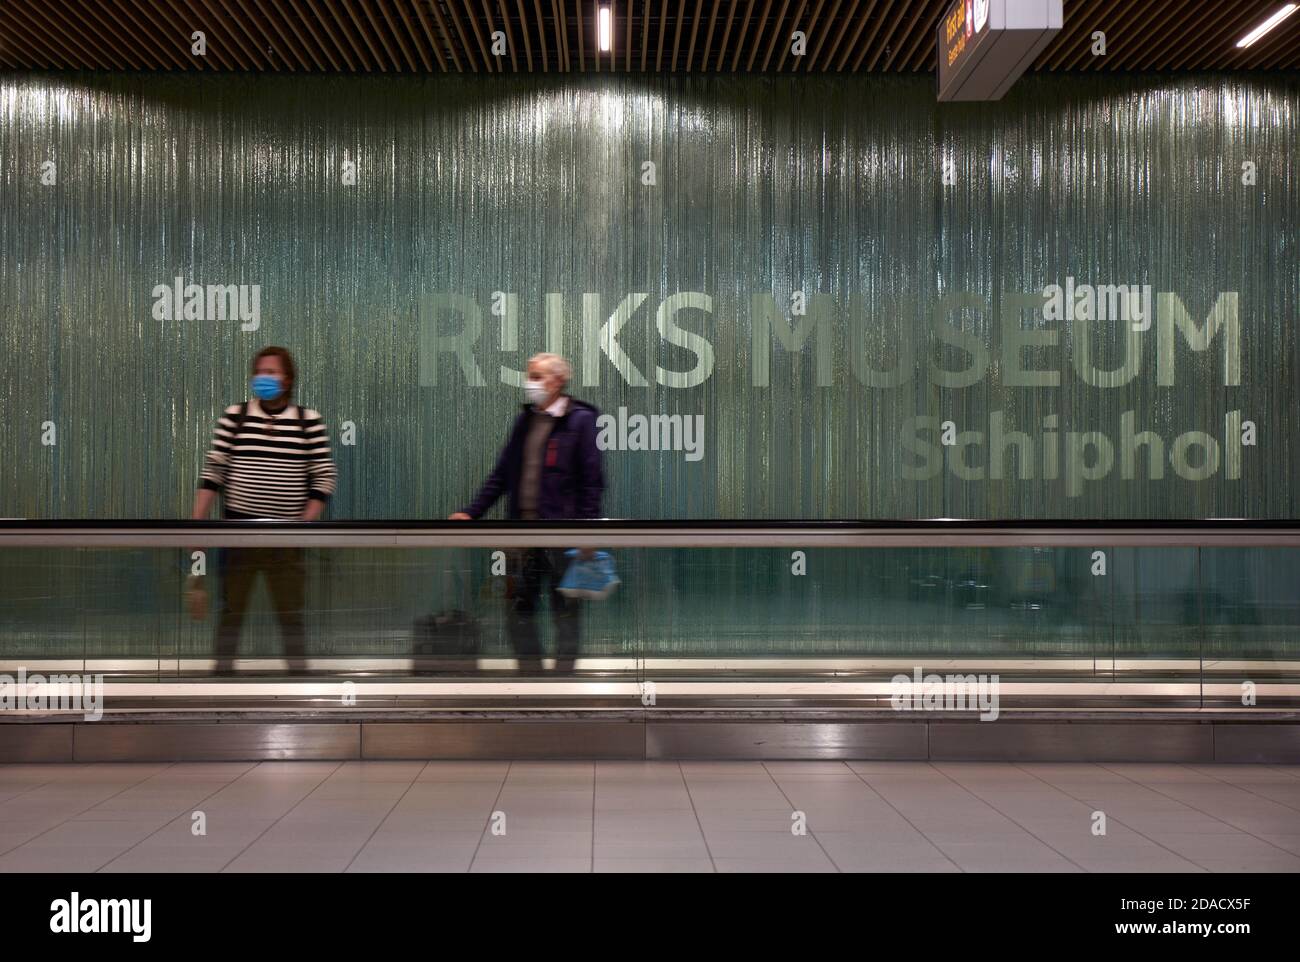 Amsterdam, Holland, 25th September 2020. Travelers wearing protective masks in transit at Schipol airport during the 2020’s COVID-19 pandemic, Amsterdam, Holland, Europe. Credit: Nicholas Tinelli/Alamy Live News. Stock Photo